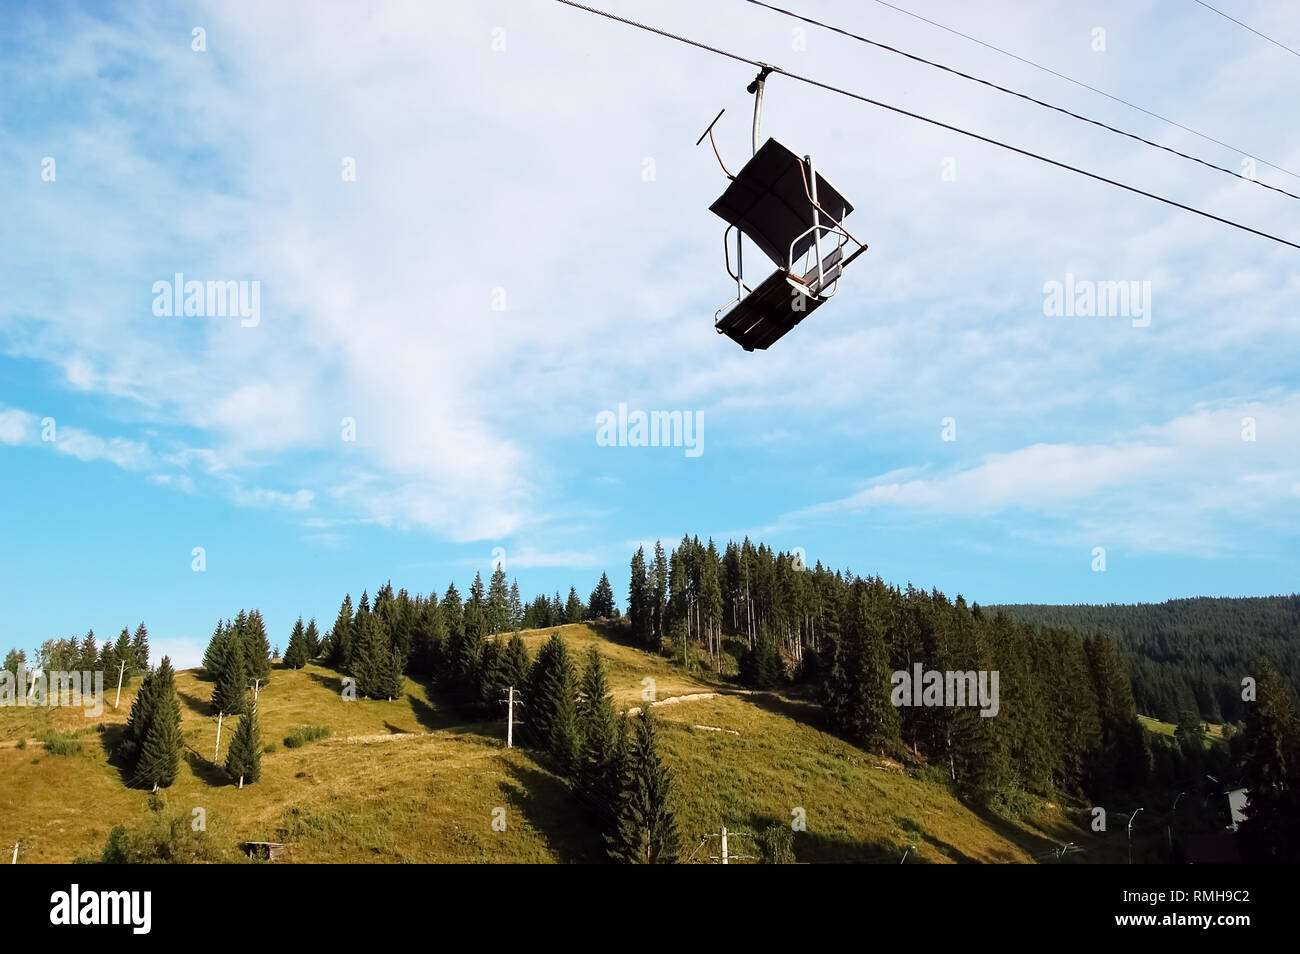 Lifting chair and picturesque view of the Carpathian mountains in Vatra Dornei, Romania. Stock Photo